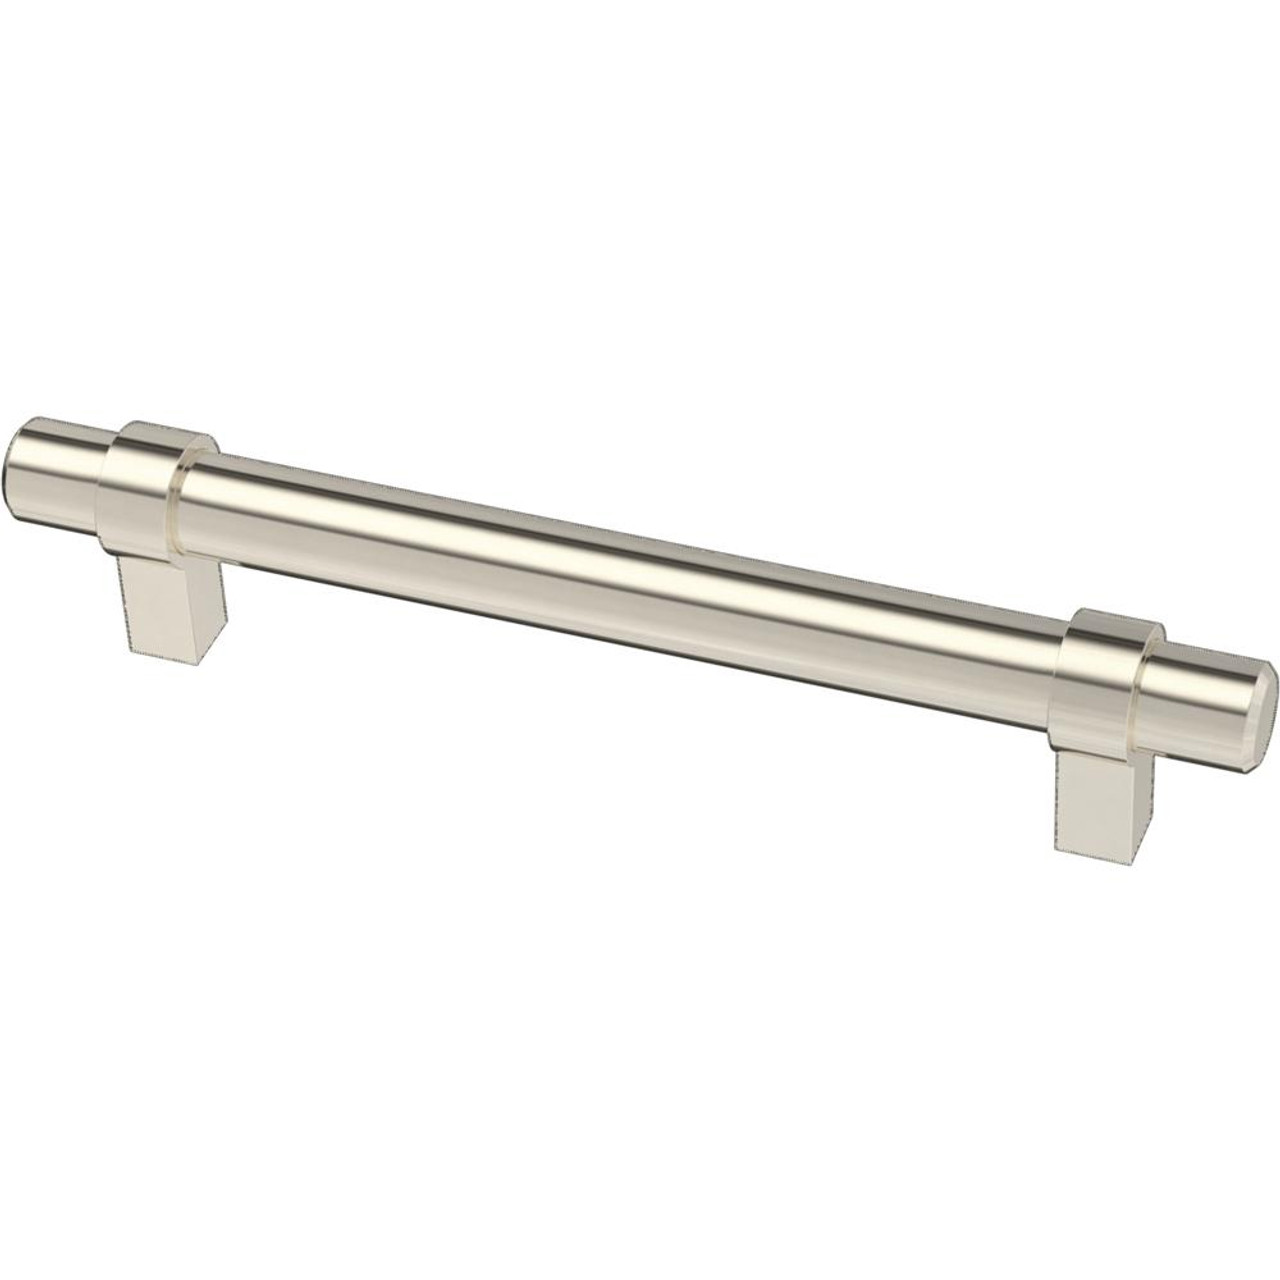 Liberty P40710C-NP 5 1/16" Wrapped Bar Pull  Nickel Plated Finish 24 Pack